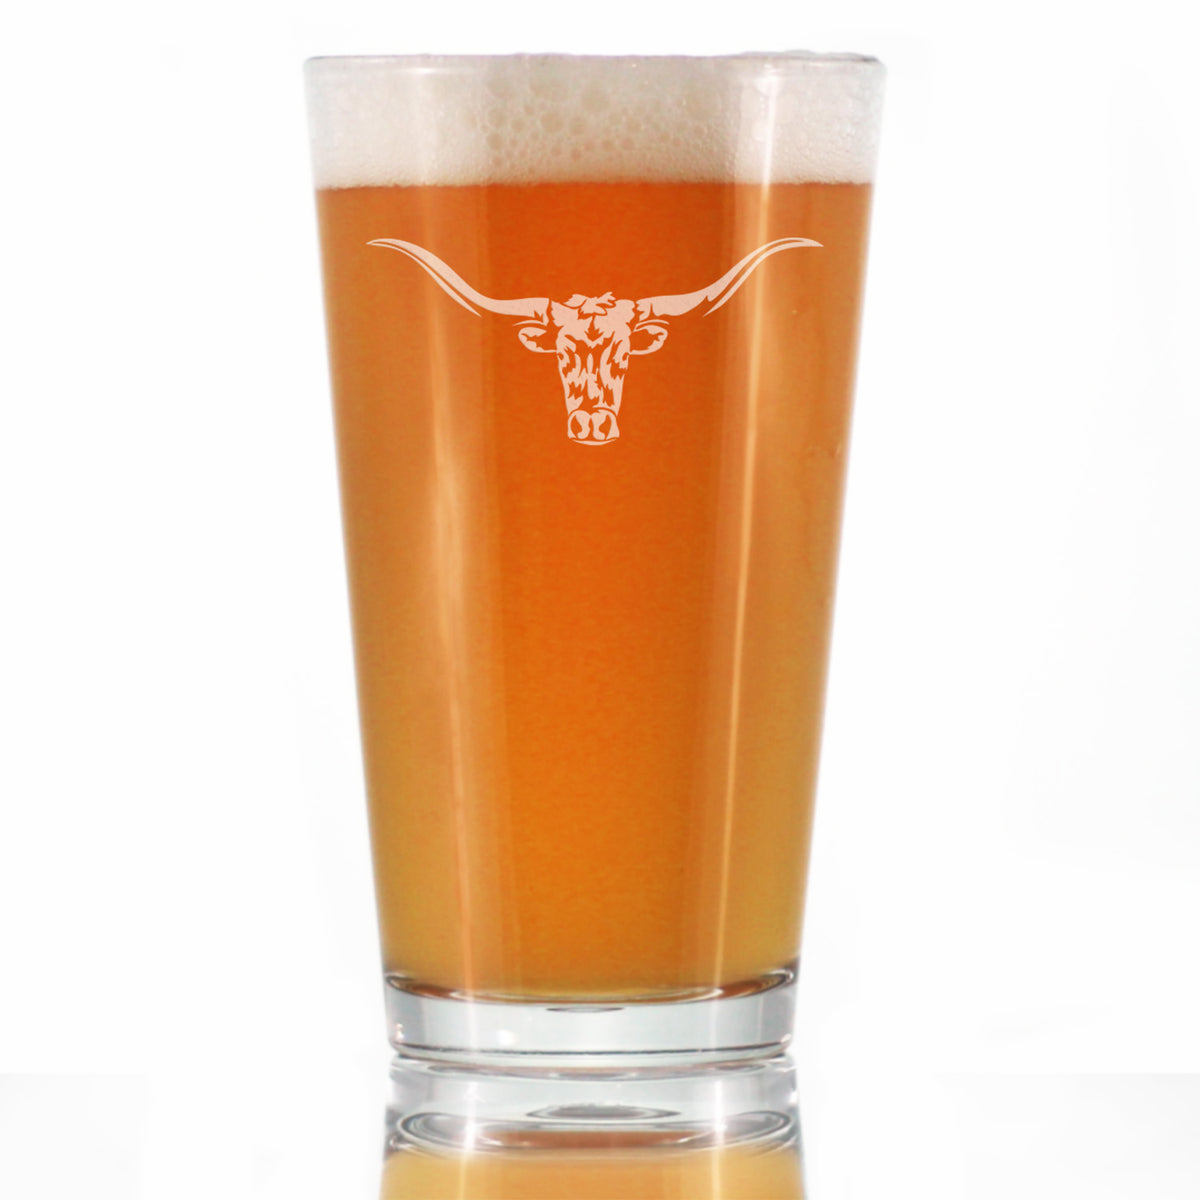 Longhorn Pint Glass for Beer - Western Themed Farm Decor and Gifts for Texan Ranchers - 16 Oz Glasses